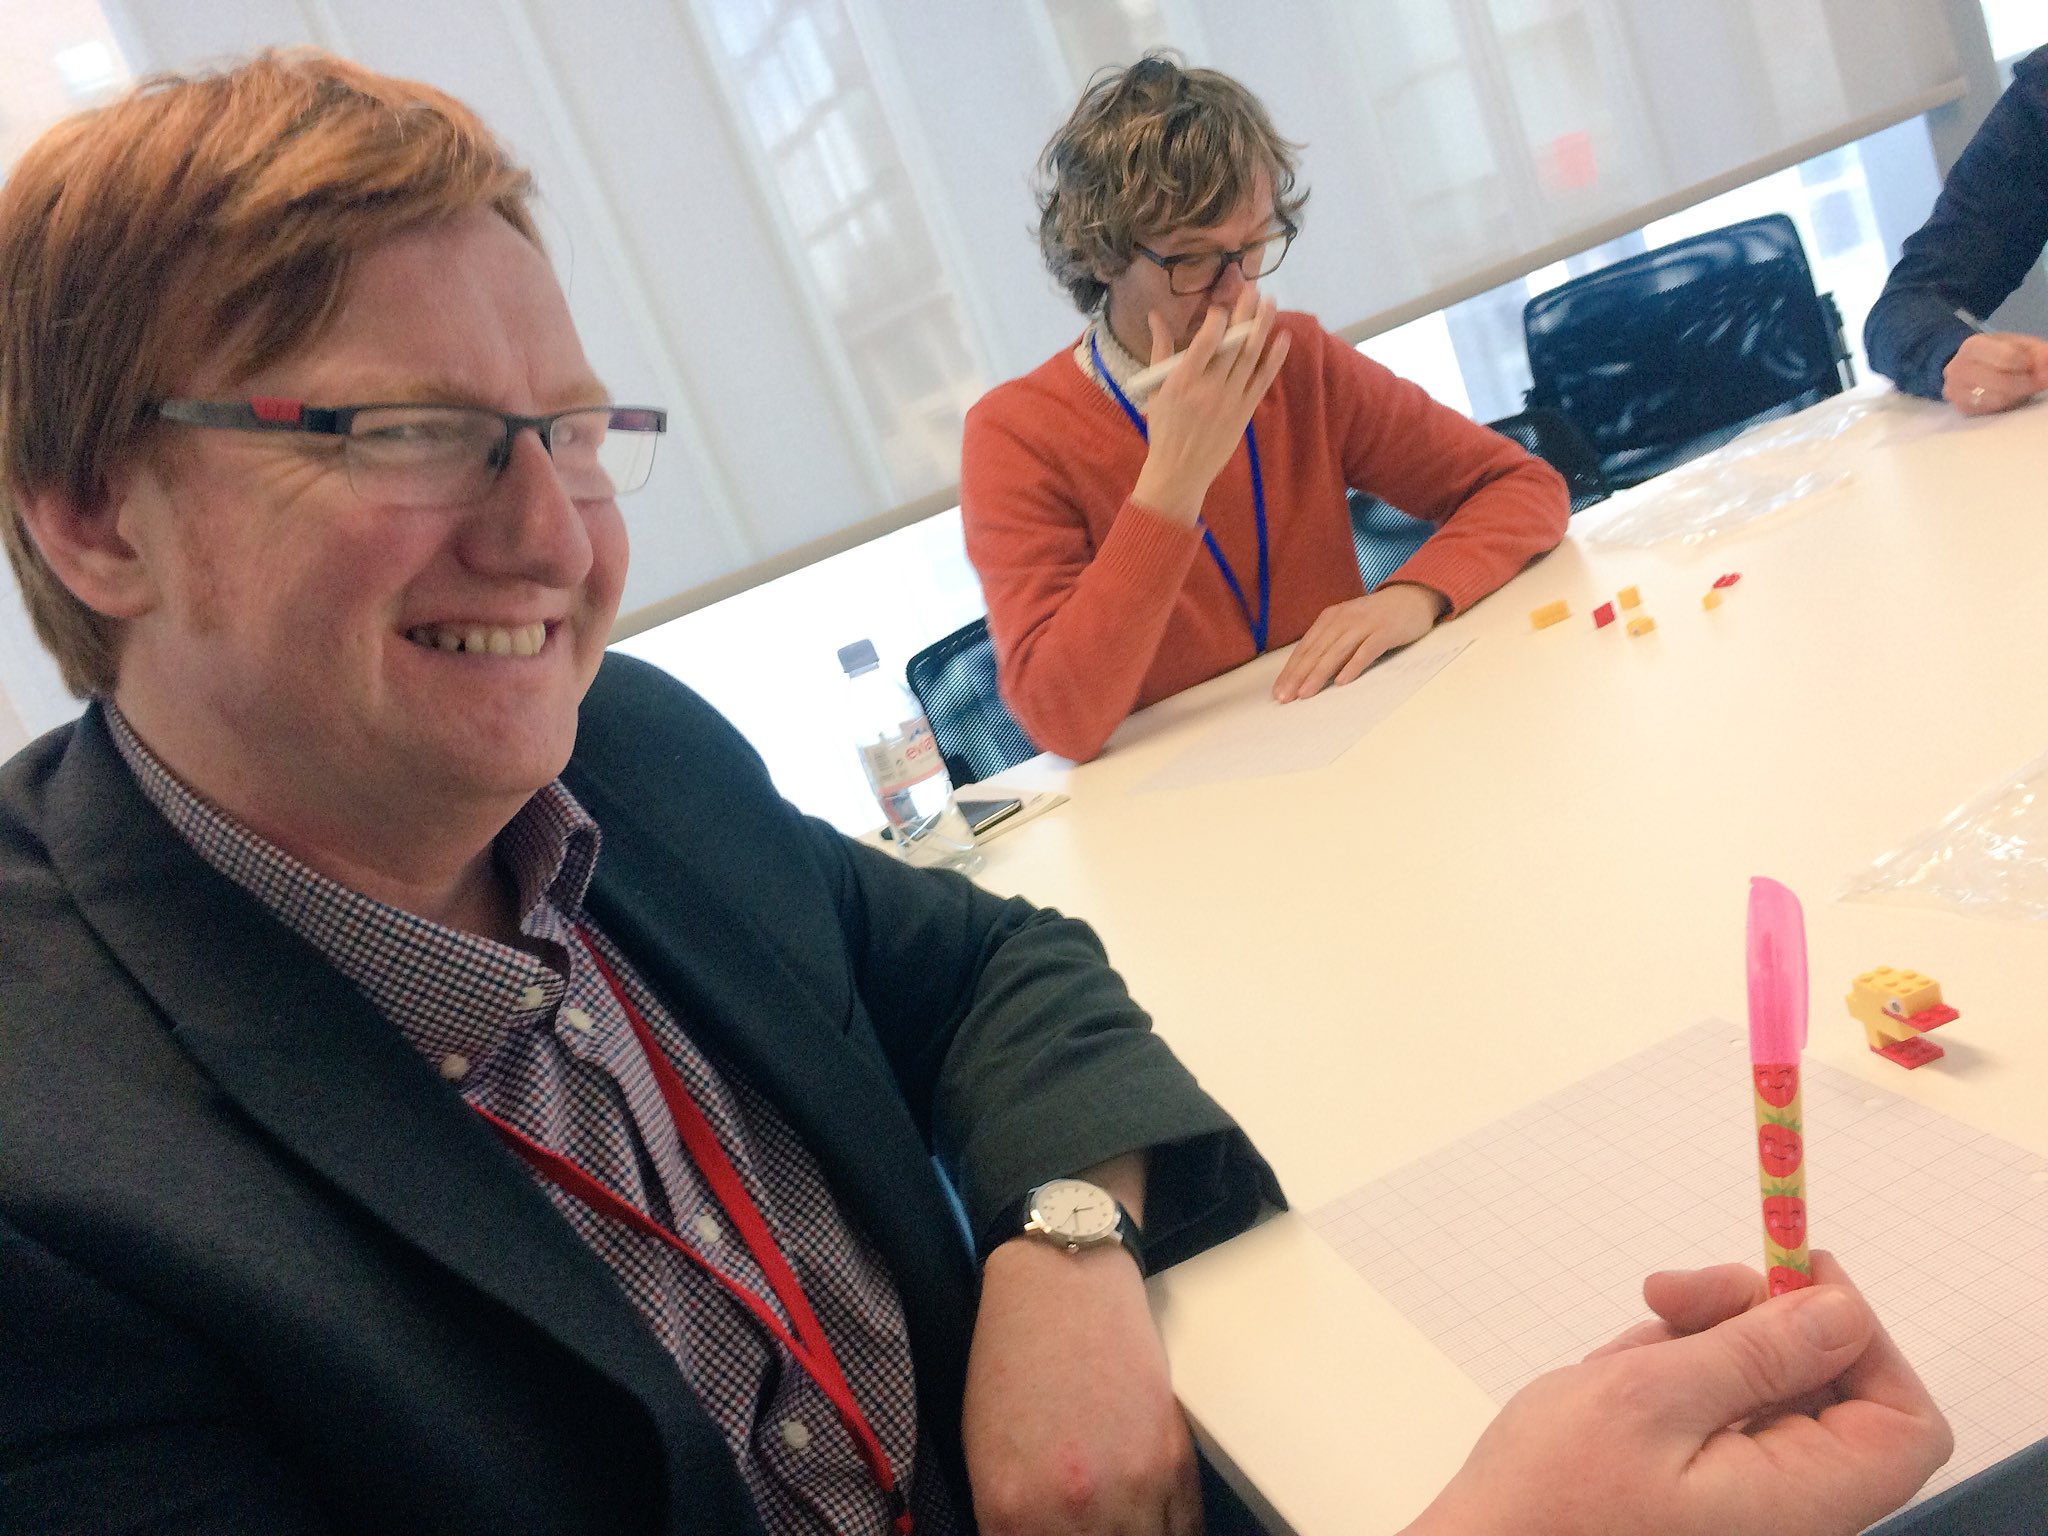 .@alexgspiers whips out his big pink pen #SocMedHE17 oh grow up everyone https://t.co/NeGSB0sLlx